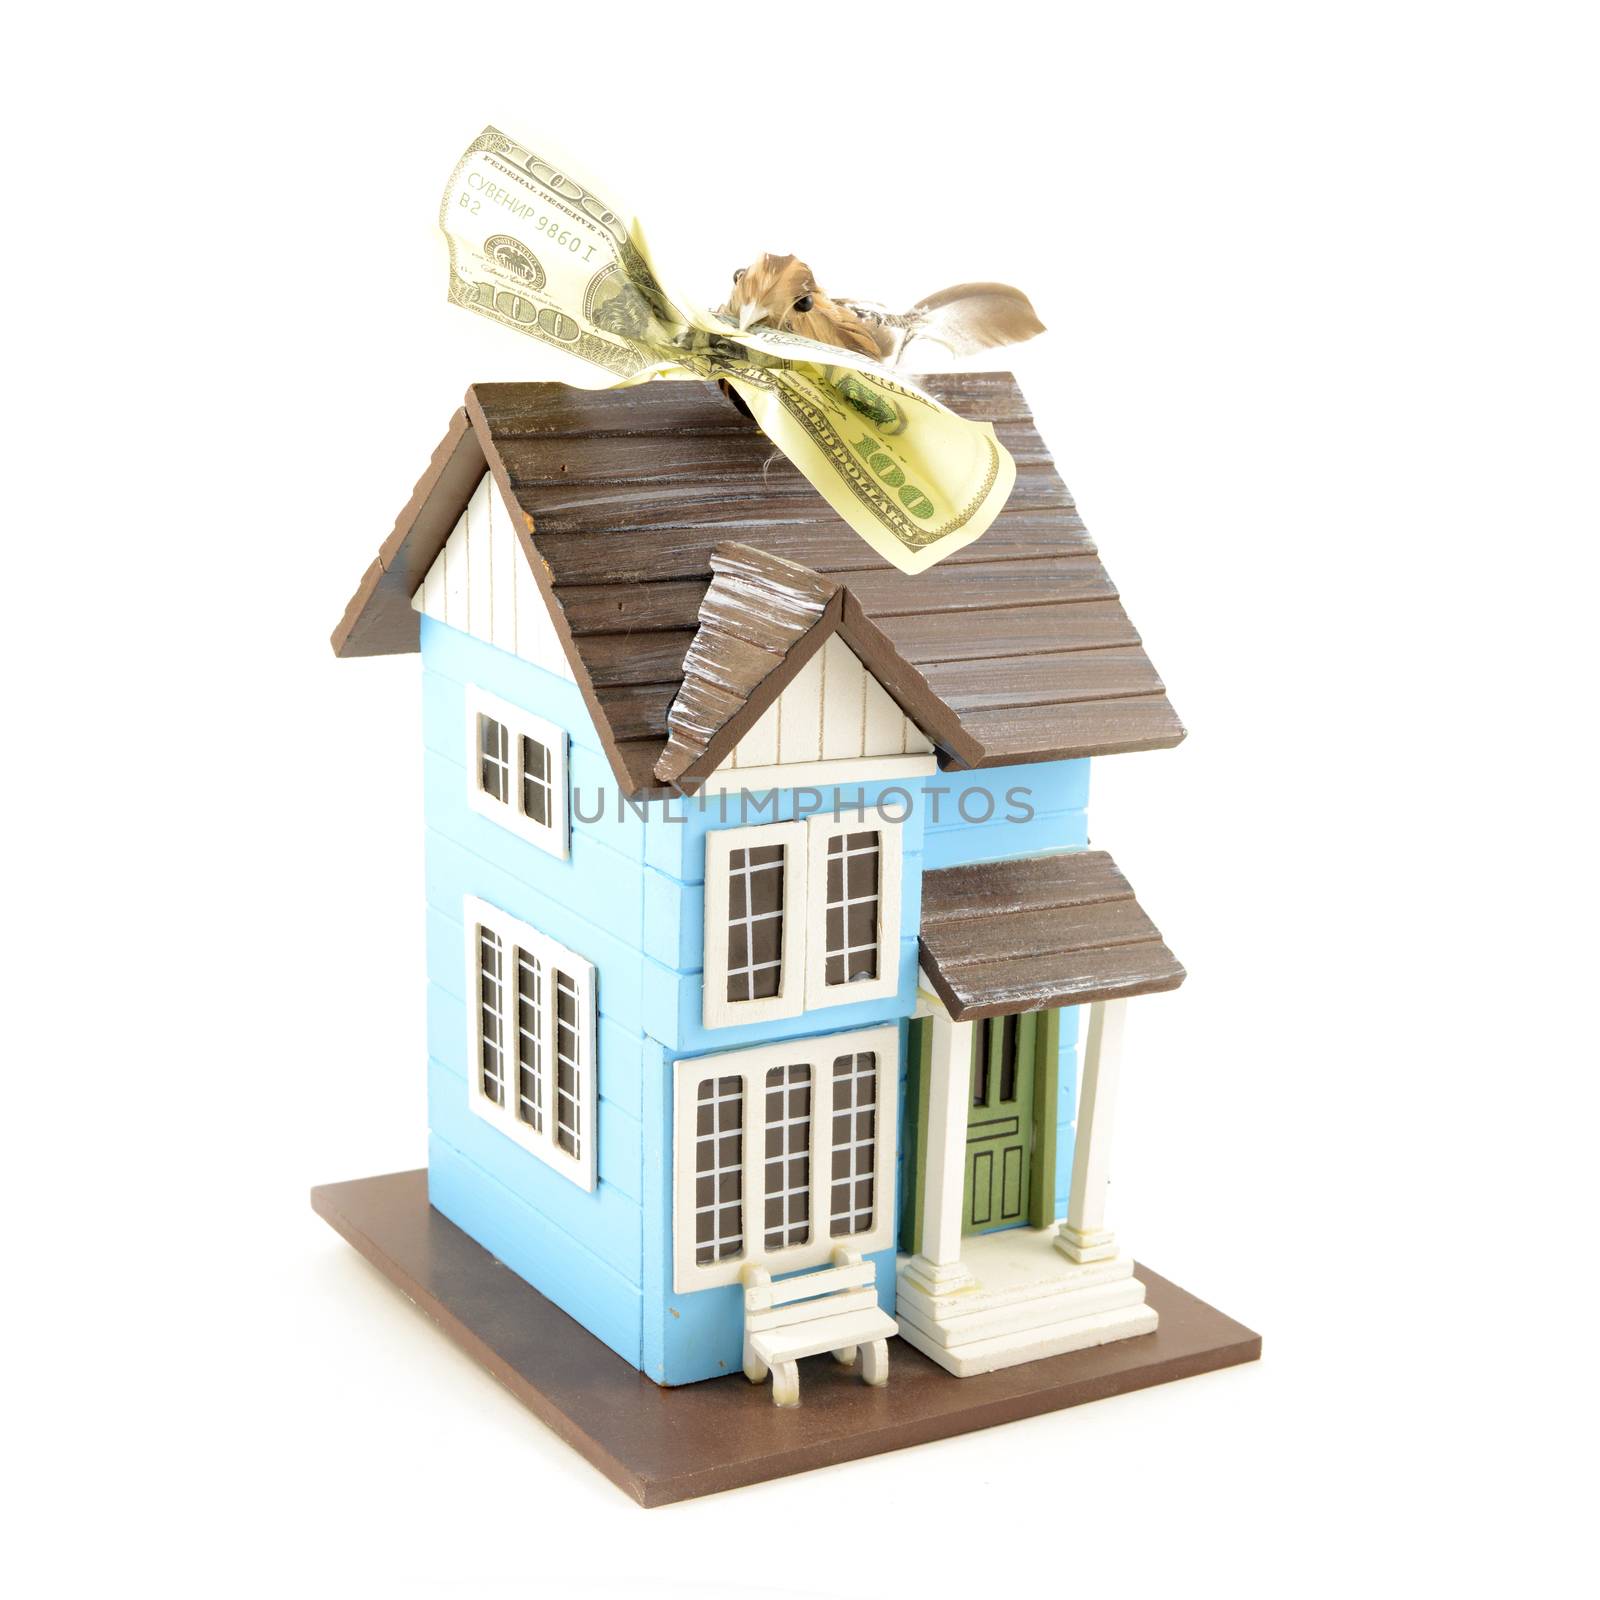 A conceptual image with a small bird holding a hundred dollar bill in its beak while resting on top of a miniature house.